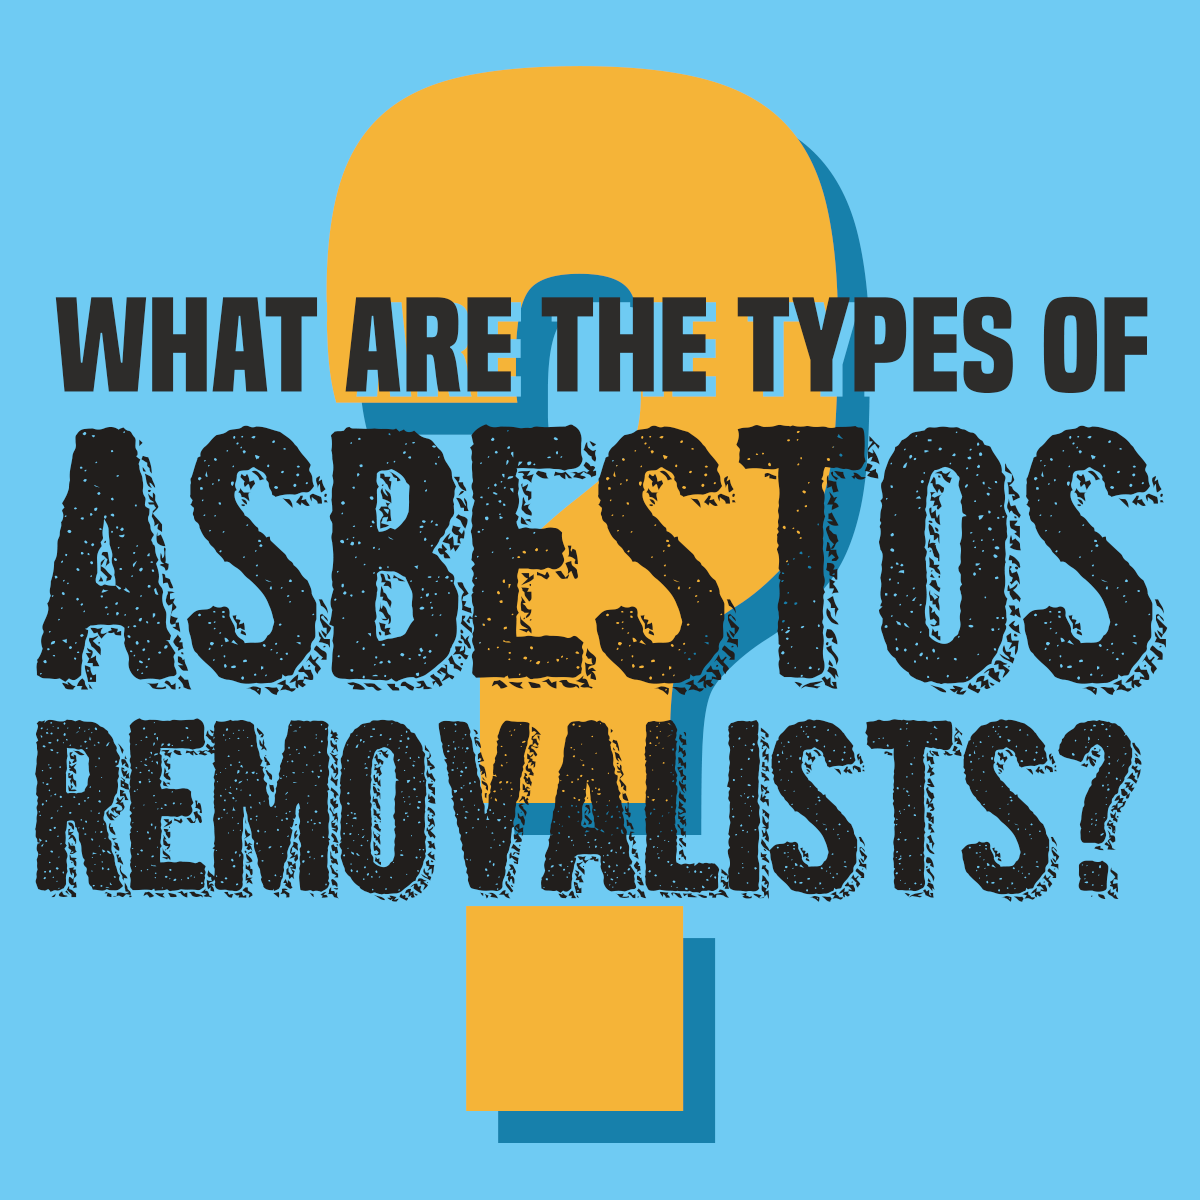 What are the types of Asbestos Removalists?